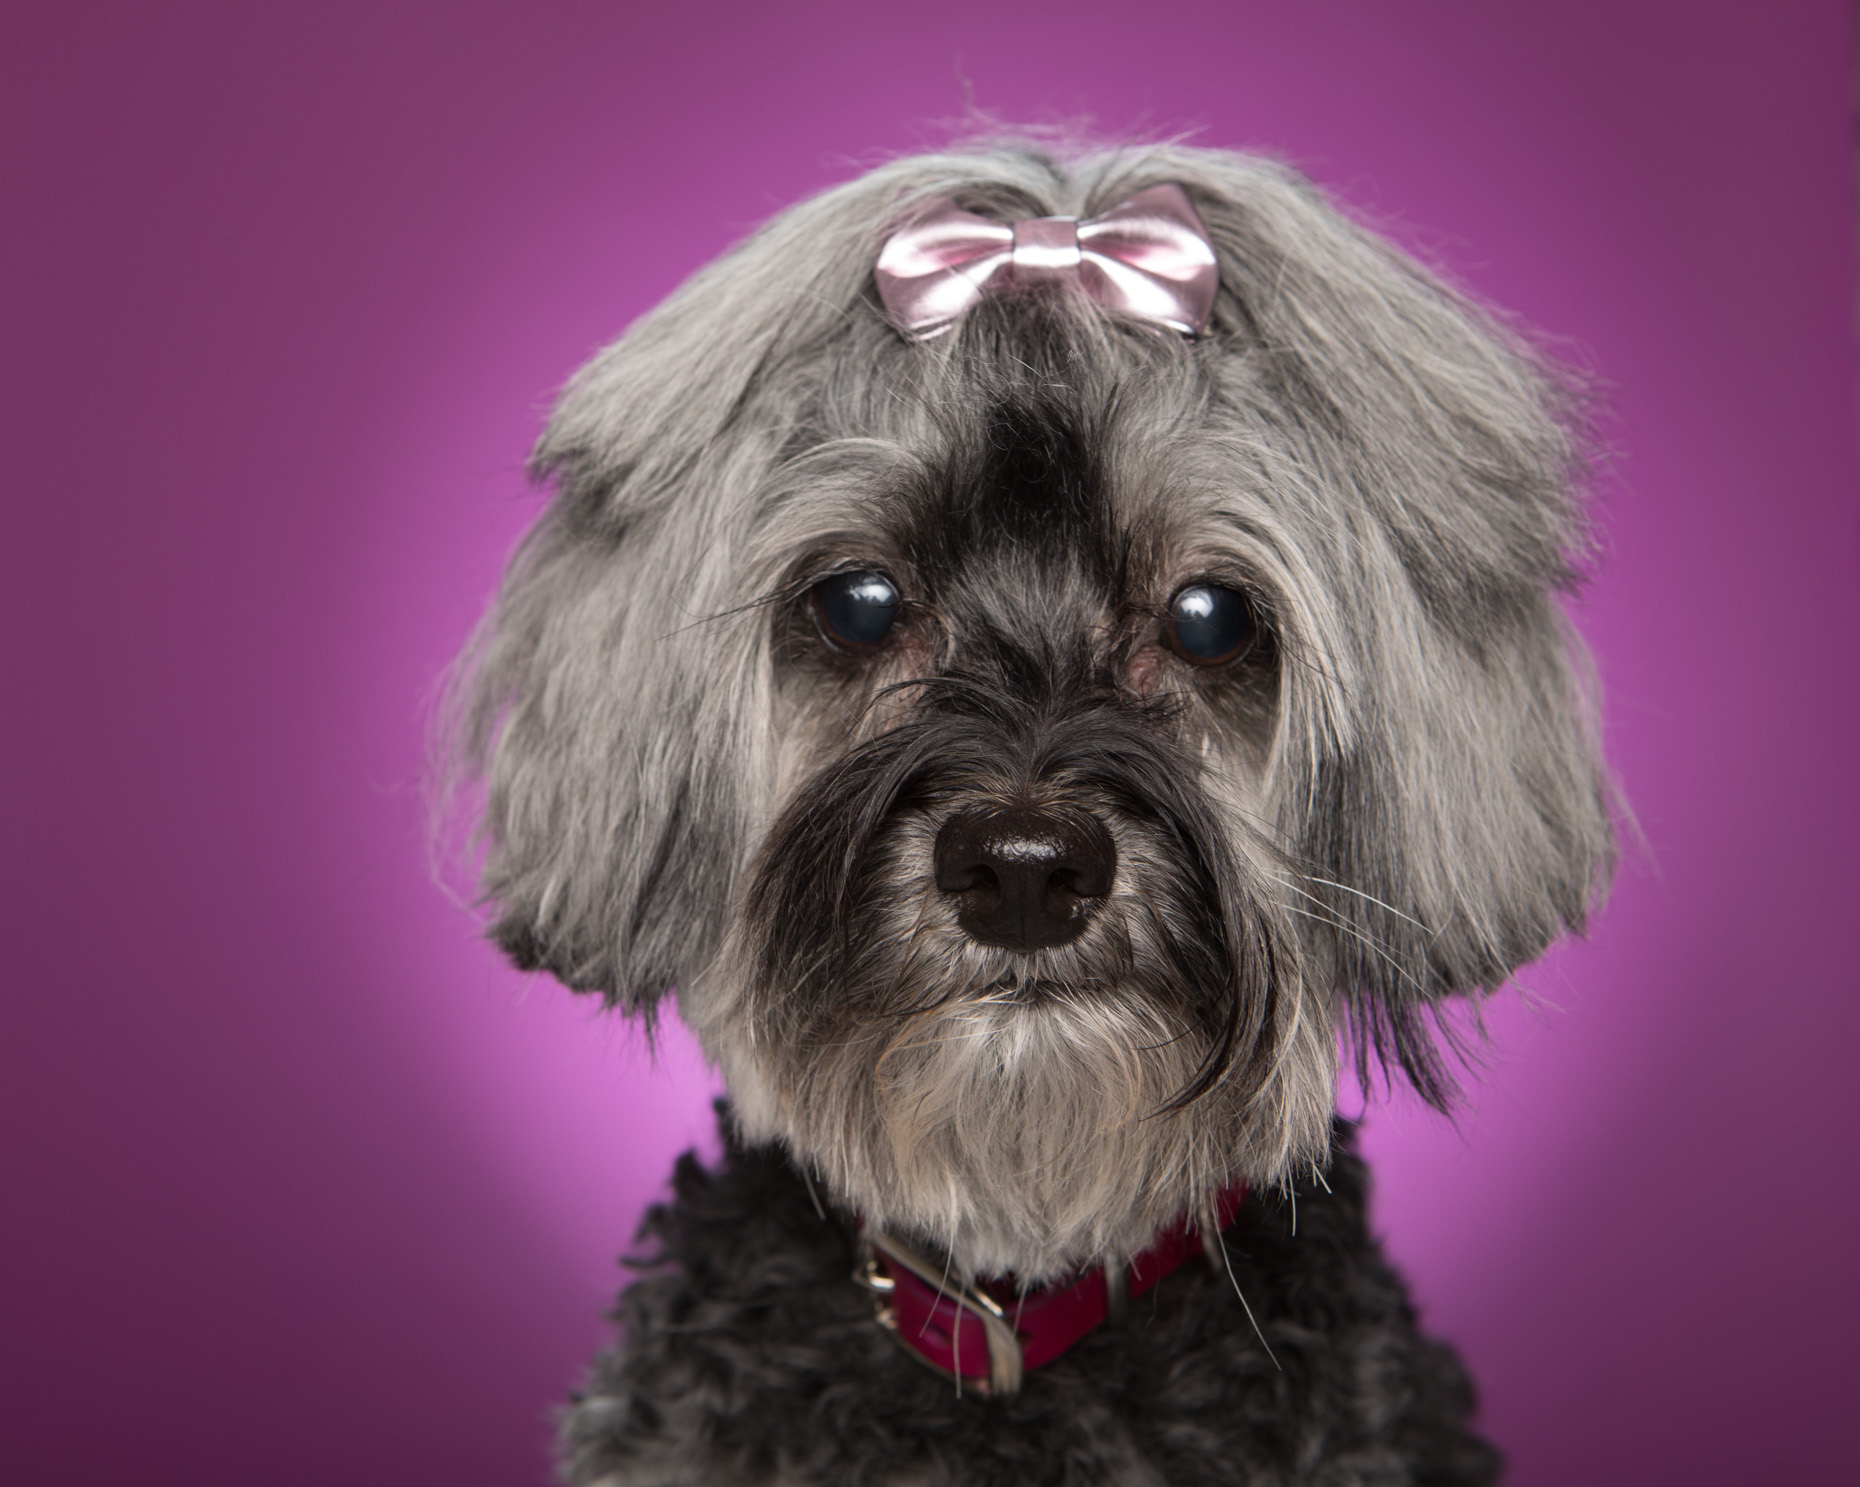 Dog and Pet Photography | Schnauzer with Bow by Mark Rogers